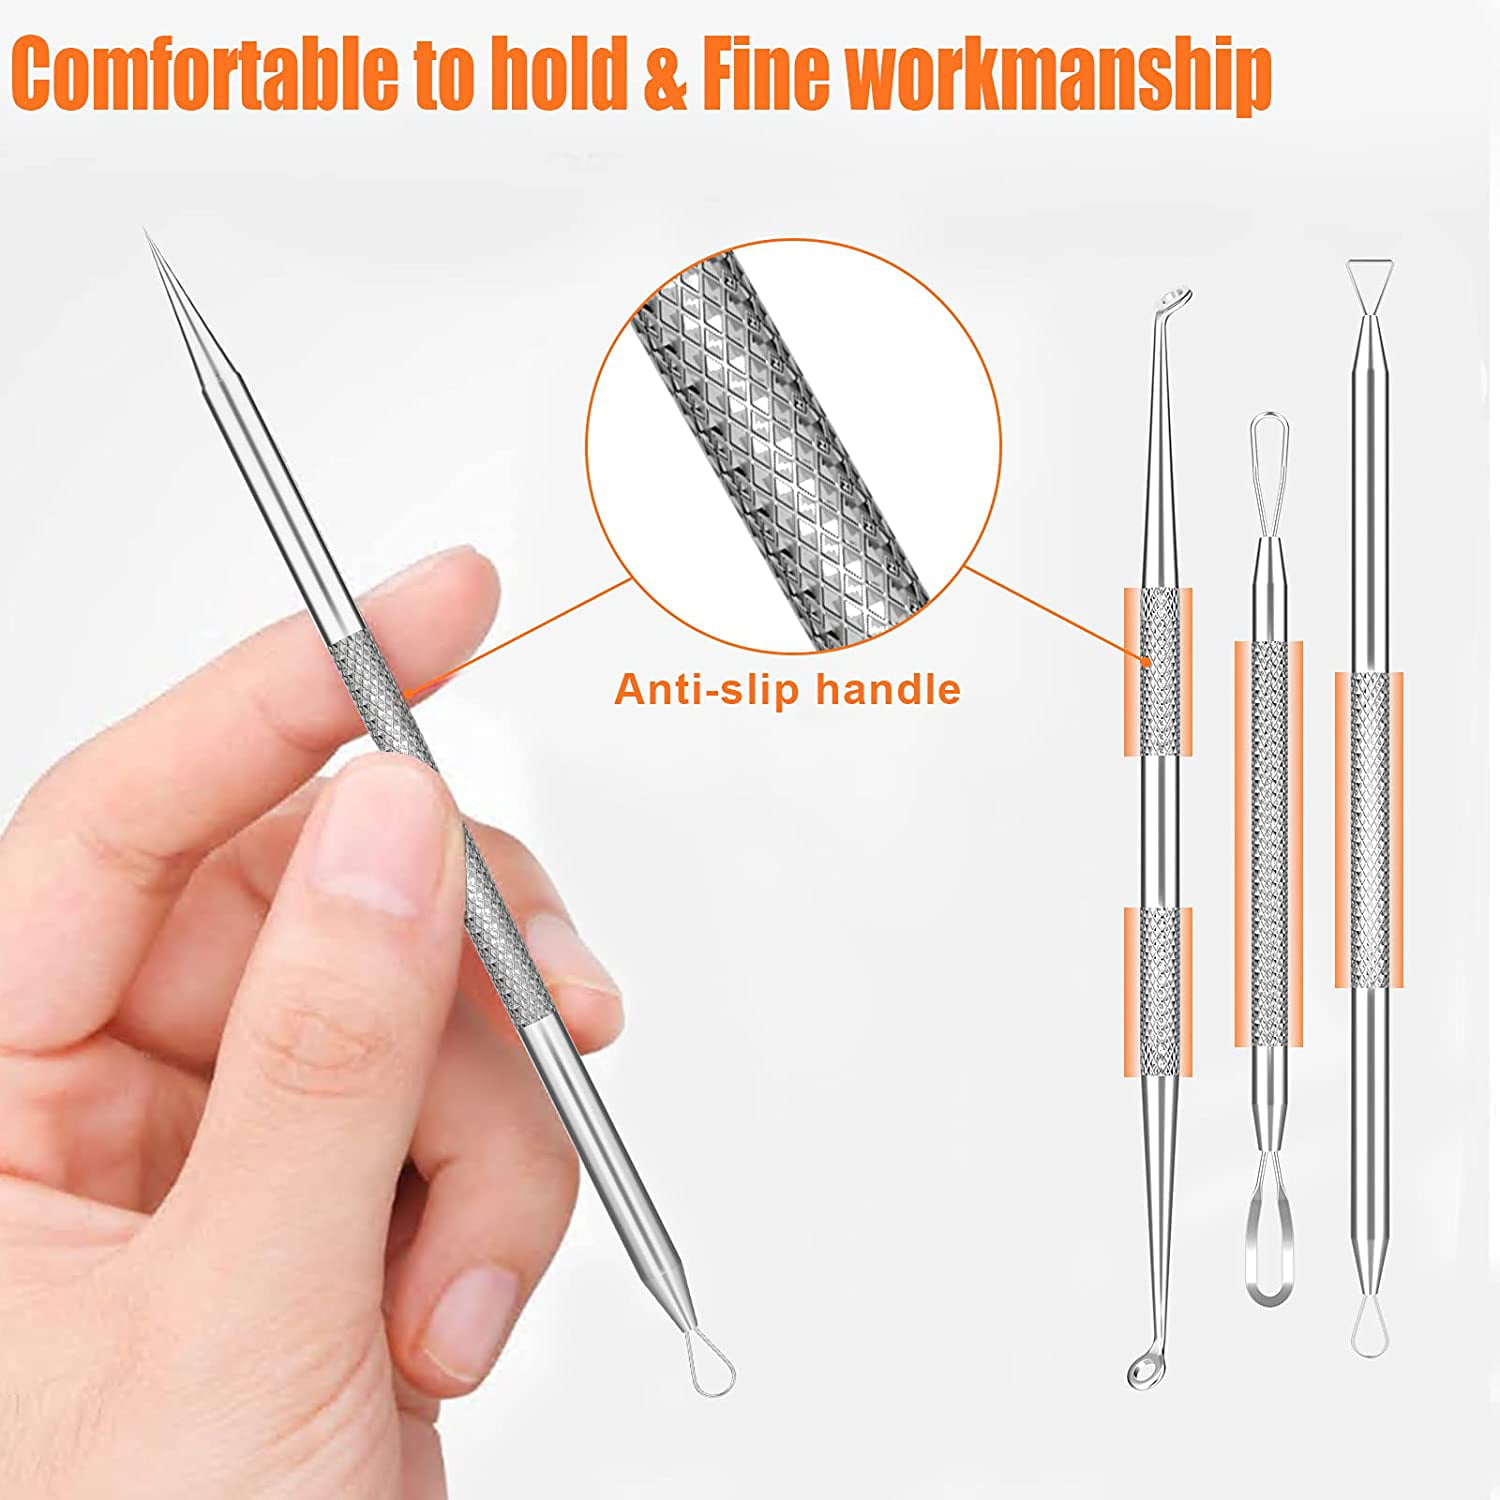 Blackhead Remover Tool, Ybaoo 11Pcs Pimple Popper Tool Kit, Ingrown Hair  Removal Kit,Acne Extractor,Zit Popper,Comedone Extraction,Blemish Whitehead